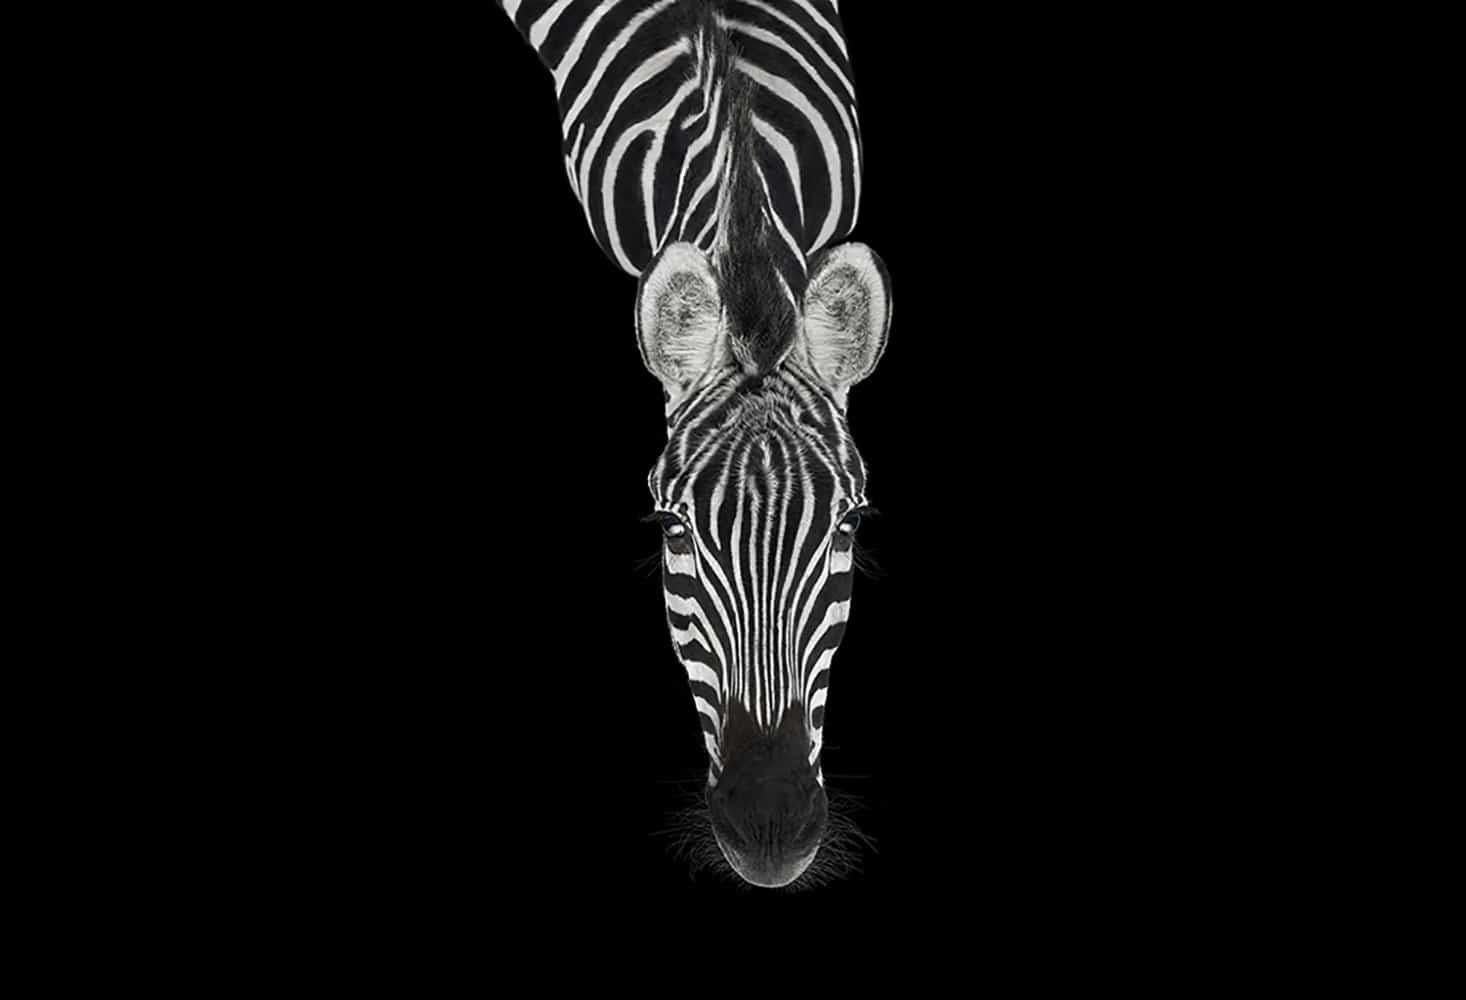 'Zebra #3, Los Angeles, CA, 2010' is a limited-edition photograph by contemporary artist Brad Wilson from the ‘Affinity’ series which features studio portraits of wild animals. 

This photograph is sold unframed as a print only. It is available in 4